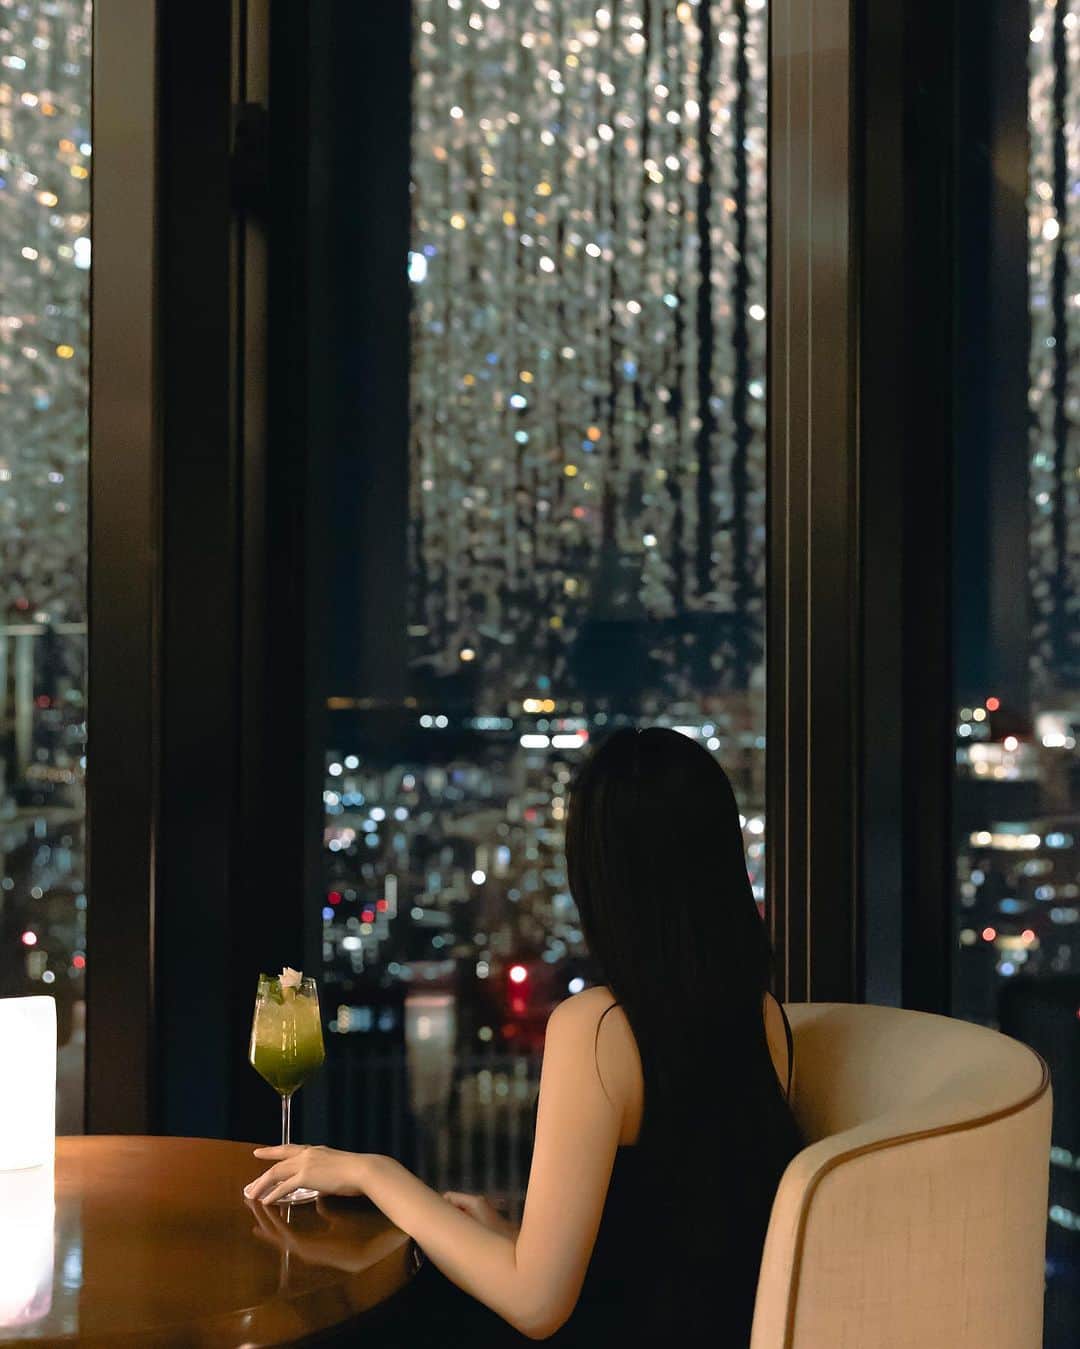 Conrad Osakaのインスタグラム：「大阪の夜景と40 Sky Bar & Lounge のアート「AURA」が重なり合う煌びやかな景色。お気に入りの一杯を片手に過ごすロマンチックなひととき。  Spend a deeply romantic evening at the ever-atmospheric 40 Sky Bar & Lounge, where the twinkling lights of the AURA art installation and the sprawling Osaka cityscape majestically intertwine in stunning, shimmering beauty.  Share your own images with us by tagging @conradosaka  ————————————————————— #コンラッド大阪 #中之島 #コンラッド #ホテルステイ #大阪ホテル #ホテルバー #大阪バー #conradosaka #nakanoshima #conrad #osakahotel #osakabar」